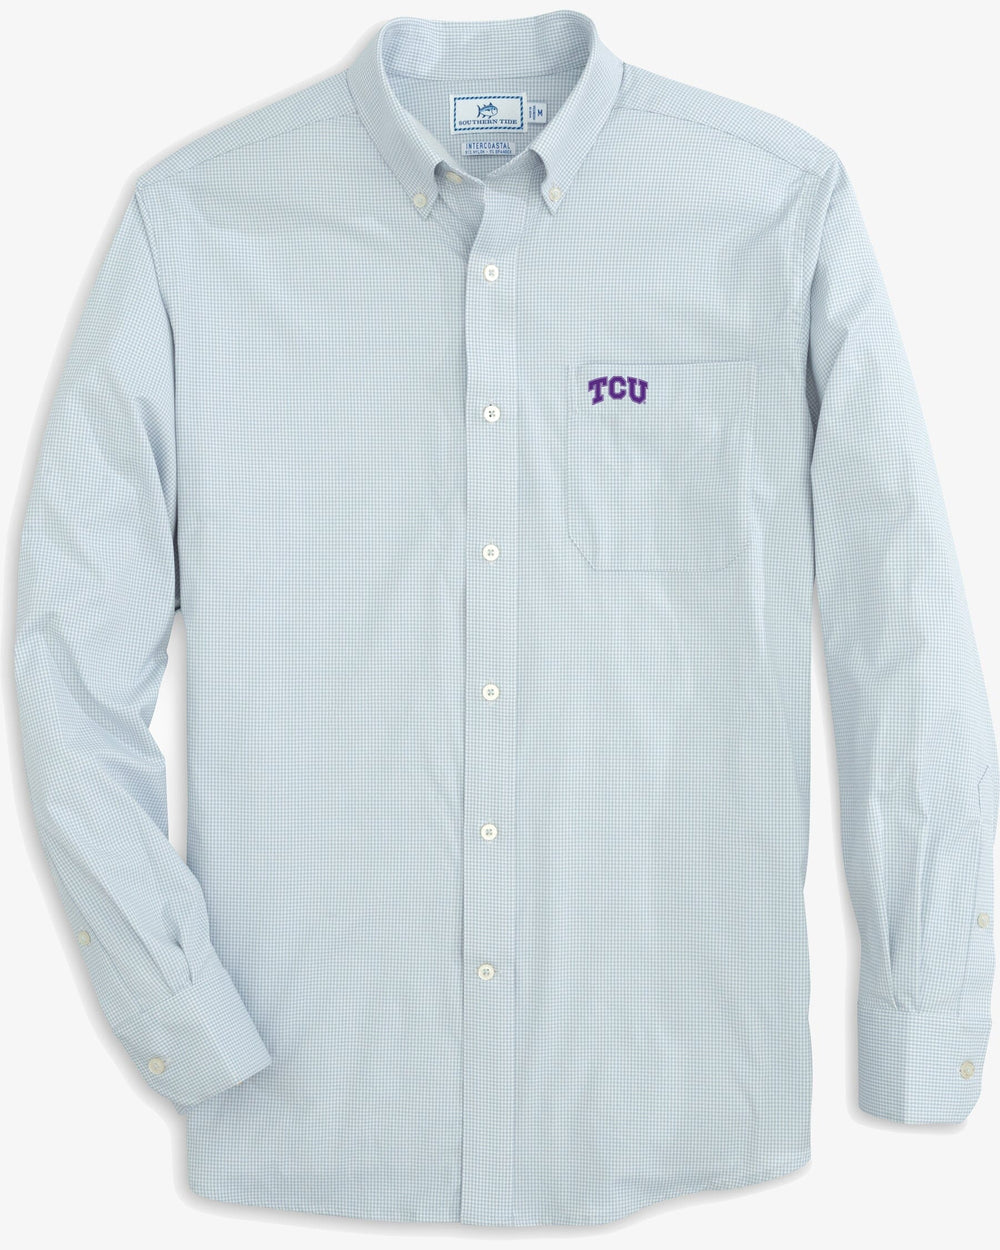 The front view of the TCU Horned Frogs Gingham Button Down Shirt by Southern Tide - Slate Grey